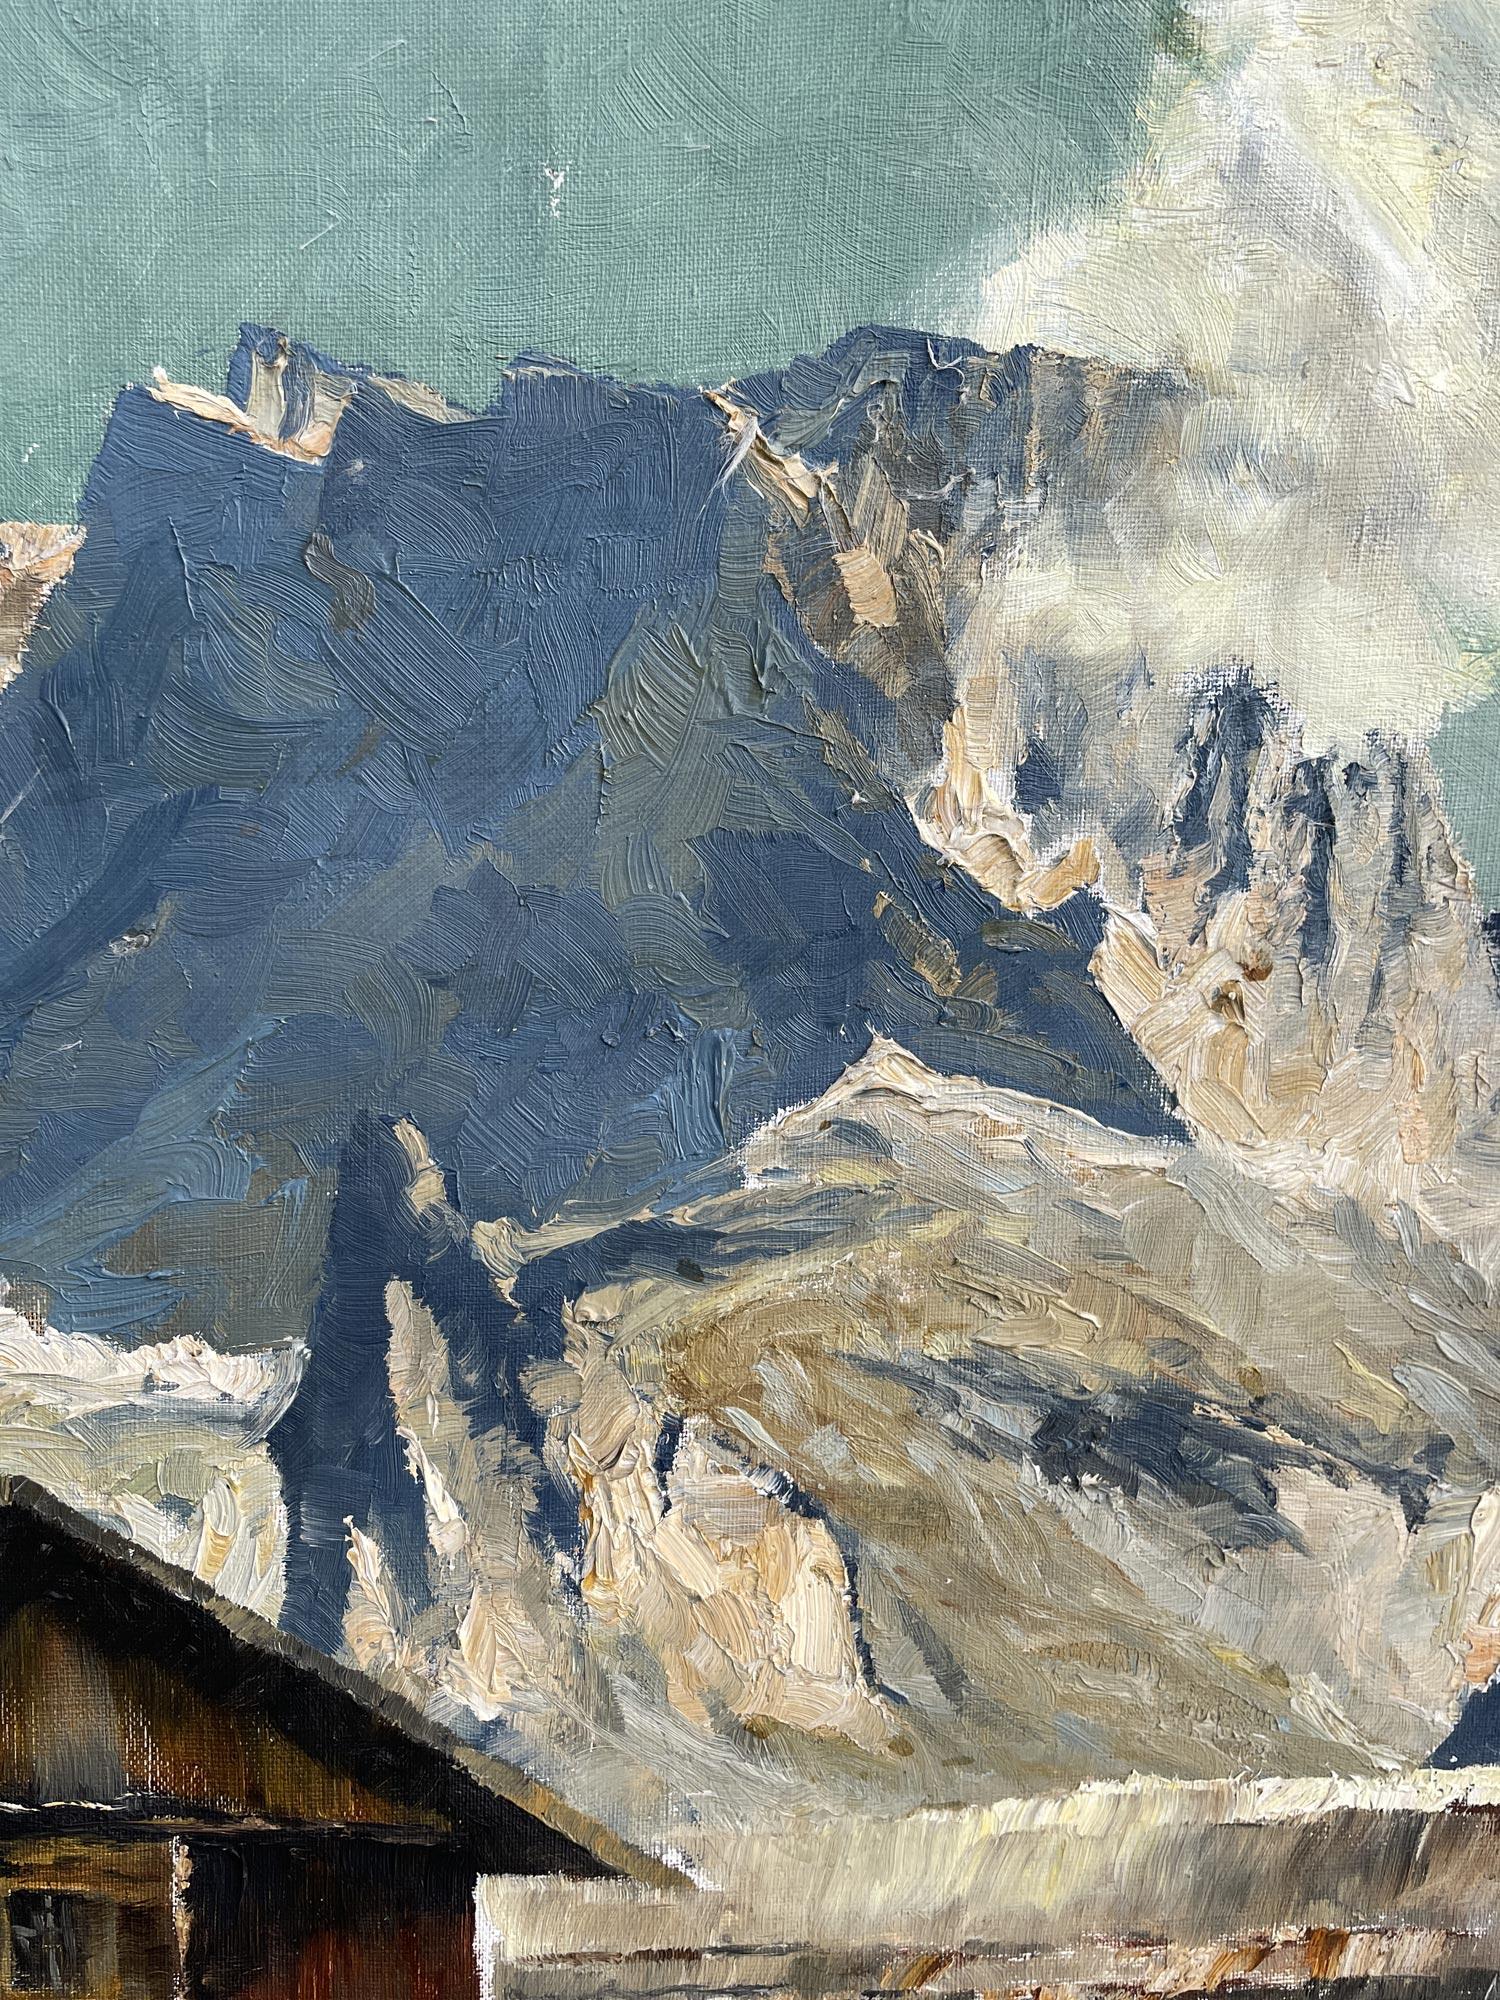 View of Gardena Pass Italian Dolomites Oil on Canvas by Georg Grauvogl  6